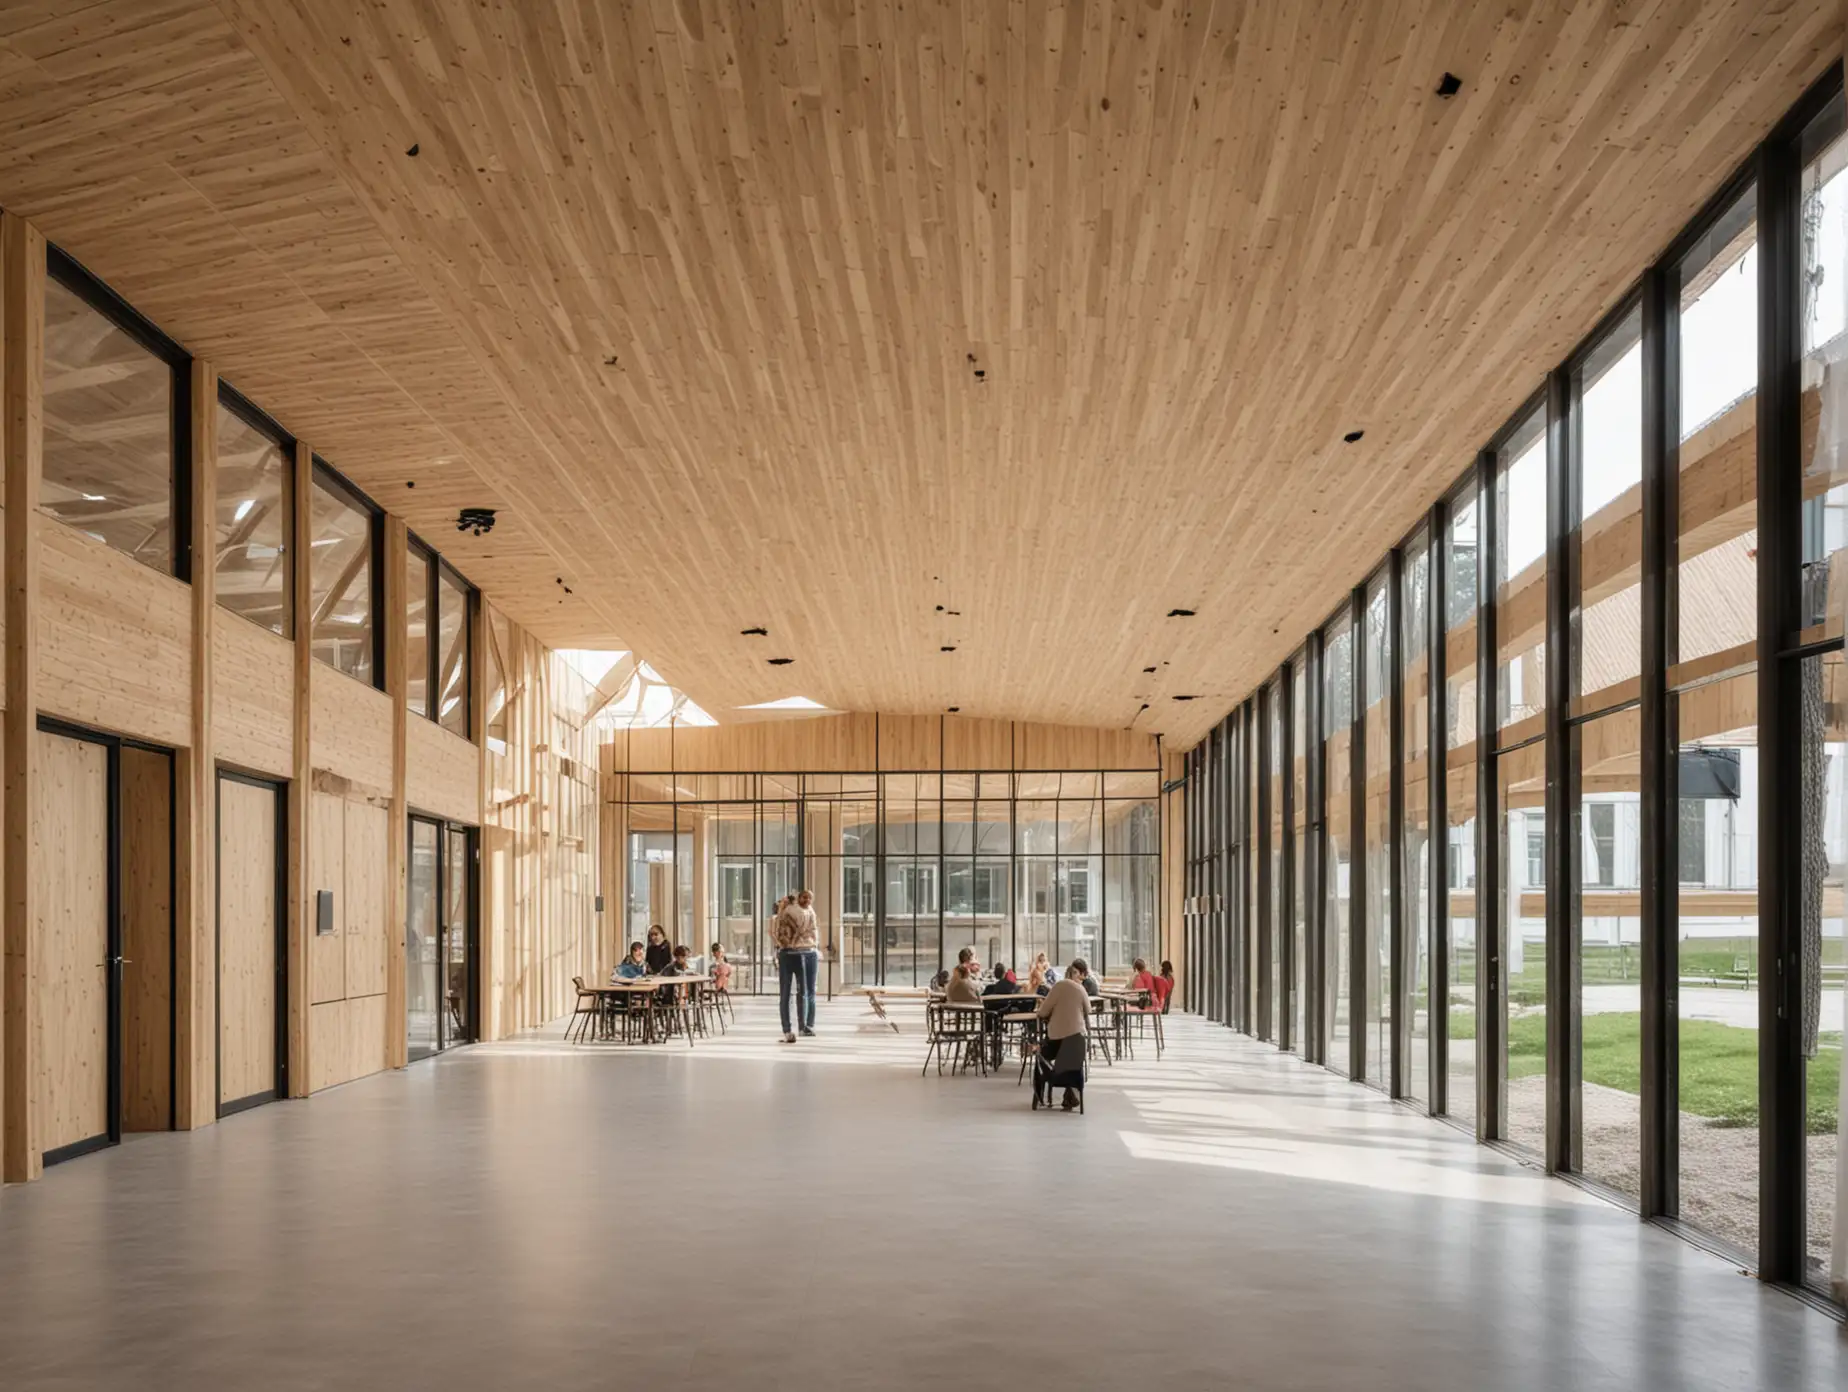 Timber Structured School Atrium with Glass Panel in Ukrian